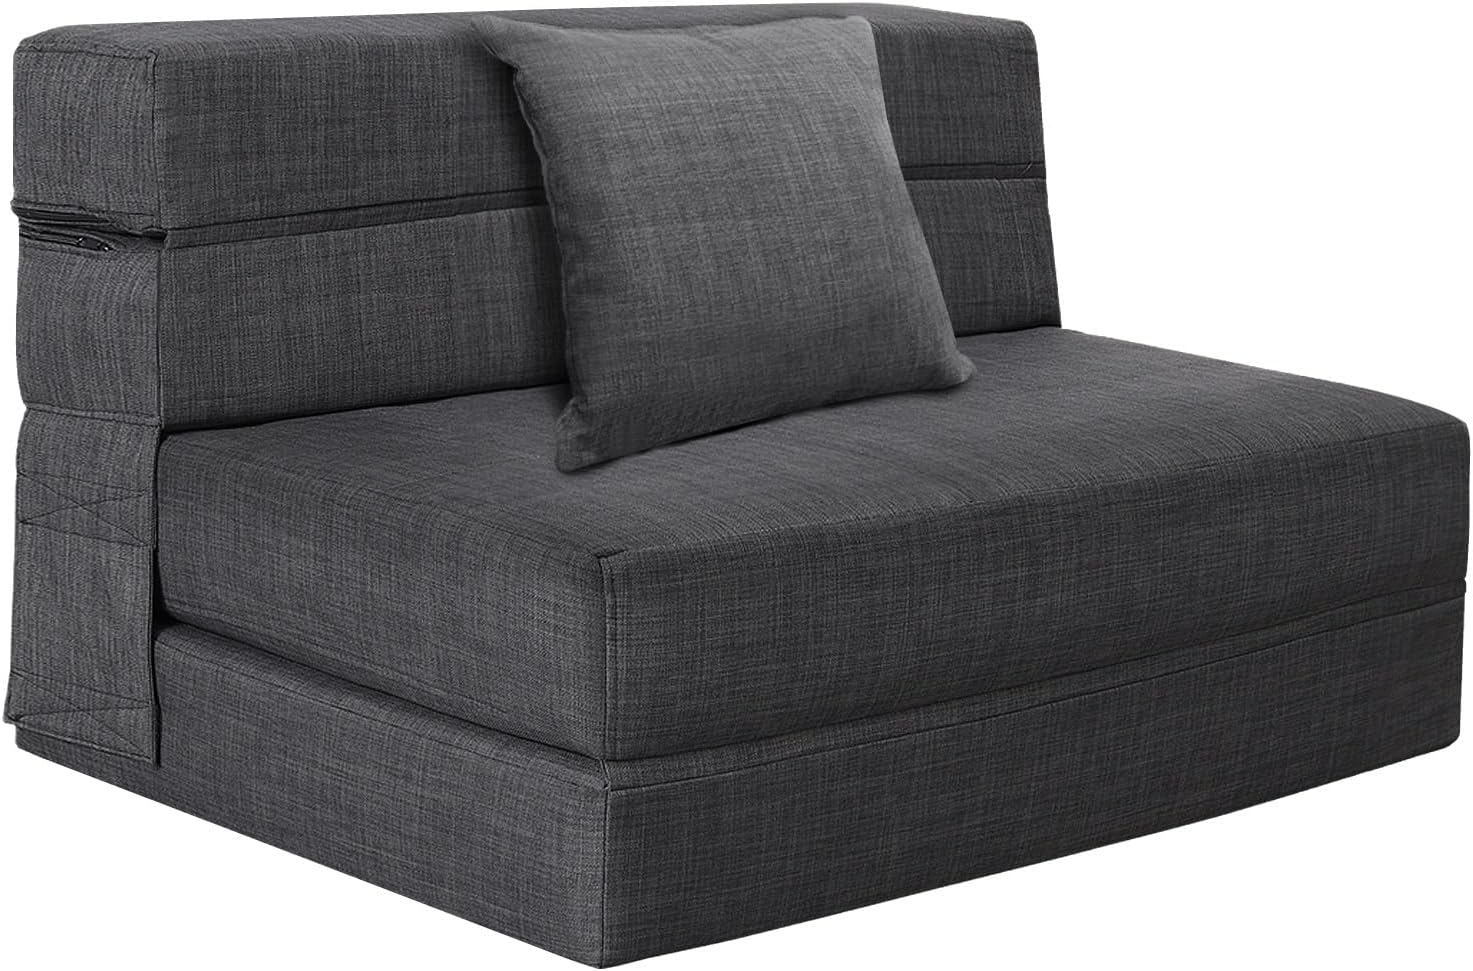 Read more about the article Nigoone Convertible Sleeper Chair Bed with Pillow Memory Foam Fold Sofa Bed Couch for ONLY $155.99 (Was $184.90)